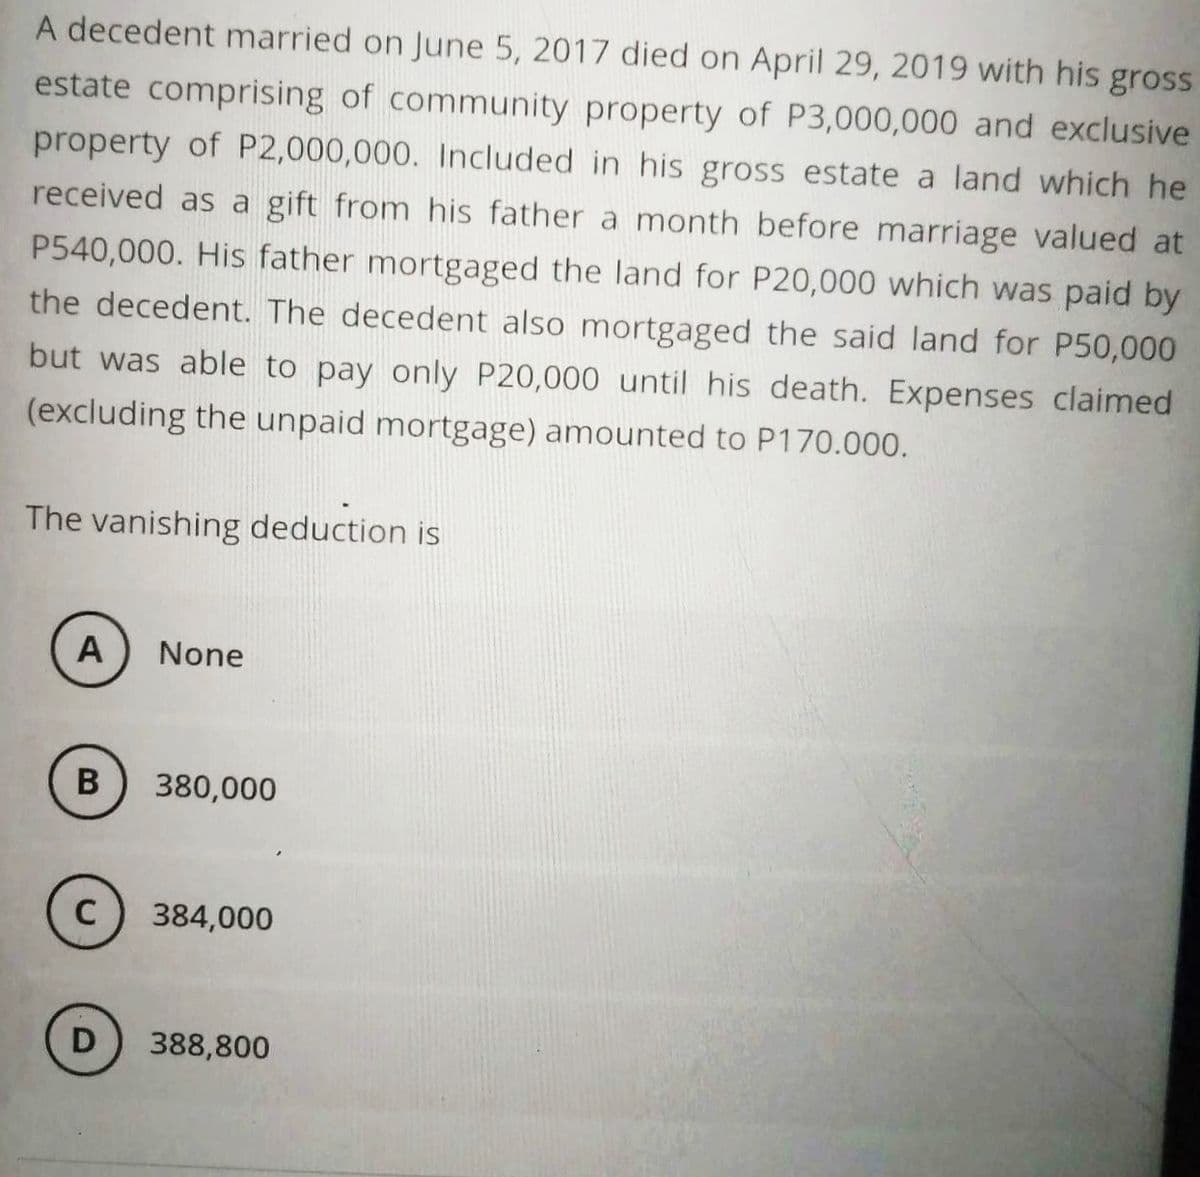 A decedent married on June 5, 2017 died on April 29, 2019 with his gross
estate comprising of community property of P3,000,000 and exclusive
property of P2,000,000. Included in his gross estate a land which he
received as a gift from his father a month before marriage valued at
P540,000. His father mortgaged the land for P20,000 which was paid by
the decedent. The decedent also mortgaged the said land for P50,000
but was able to pay only P20,000 until his death. Expenses claimed
(excluding the unpaid mortgage) amounted to P170.000.
The vanishing deduction is
A
B
C
D
None
380,000
384,000
388,800